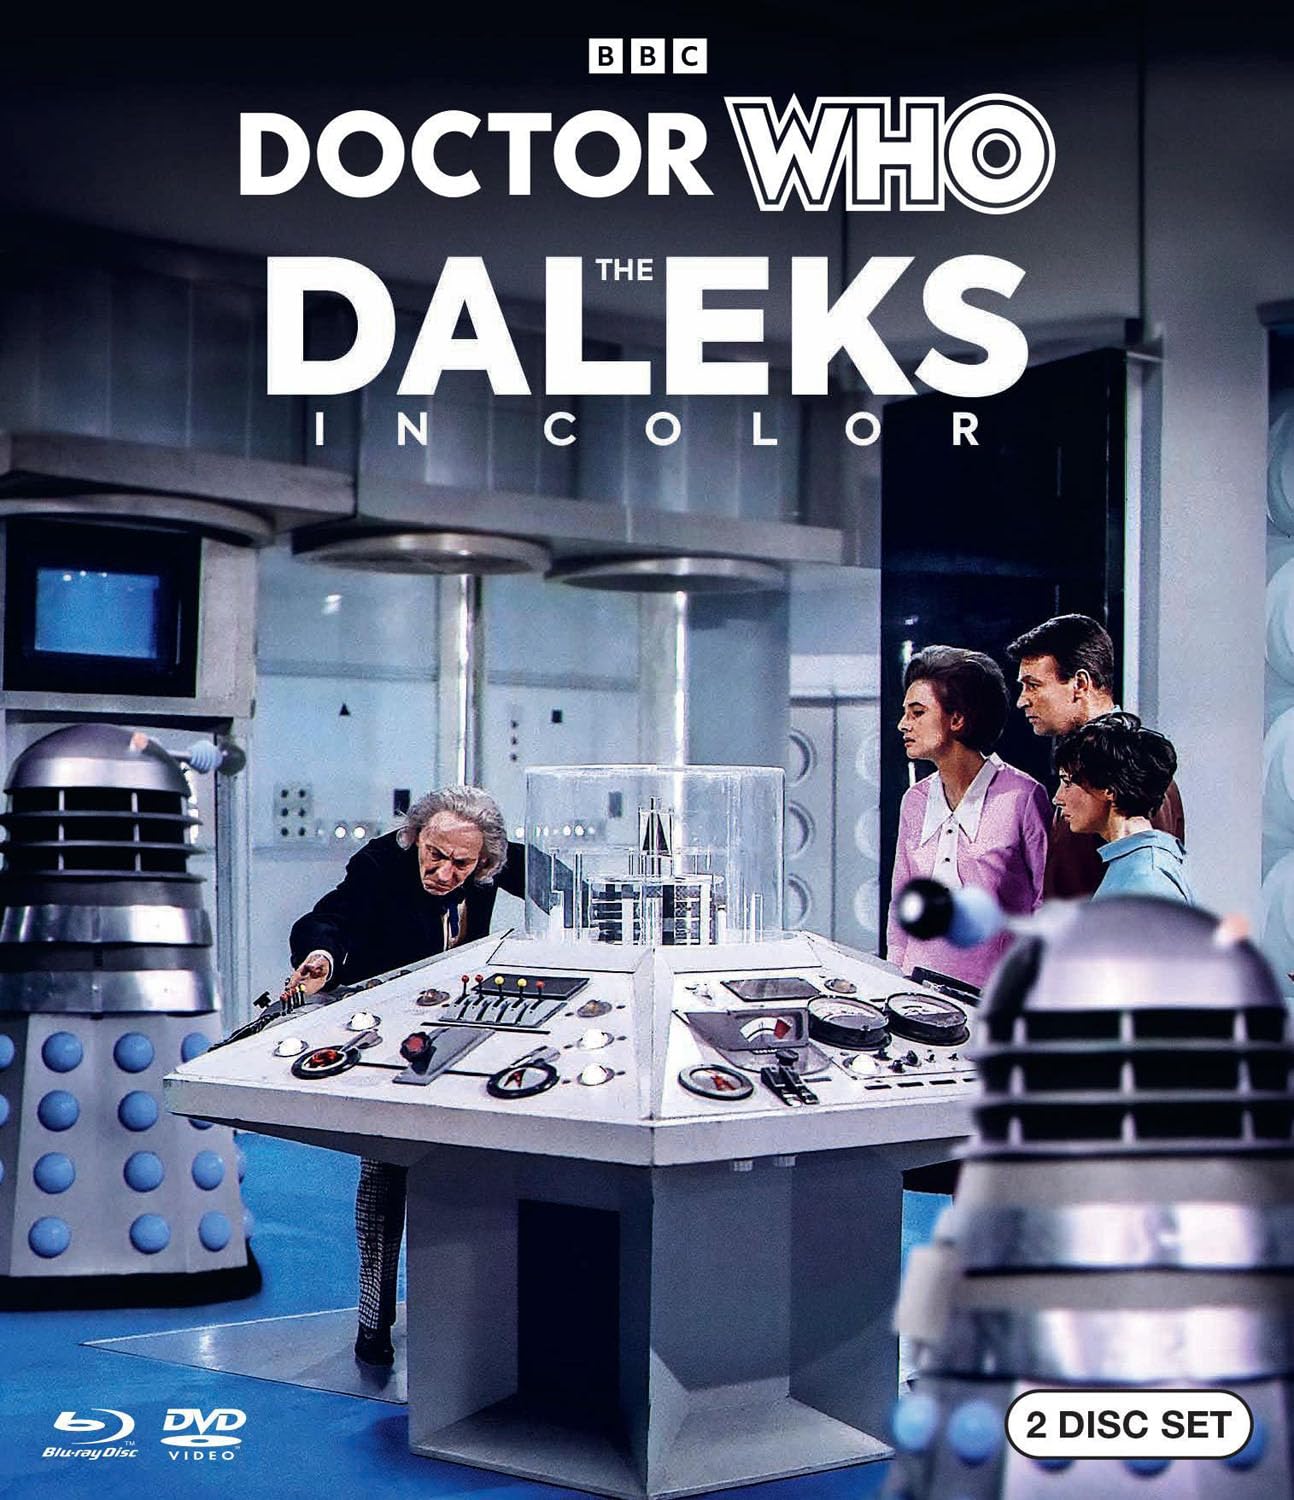 Doctor Who The Daleks in Colour BluRay